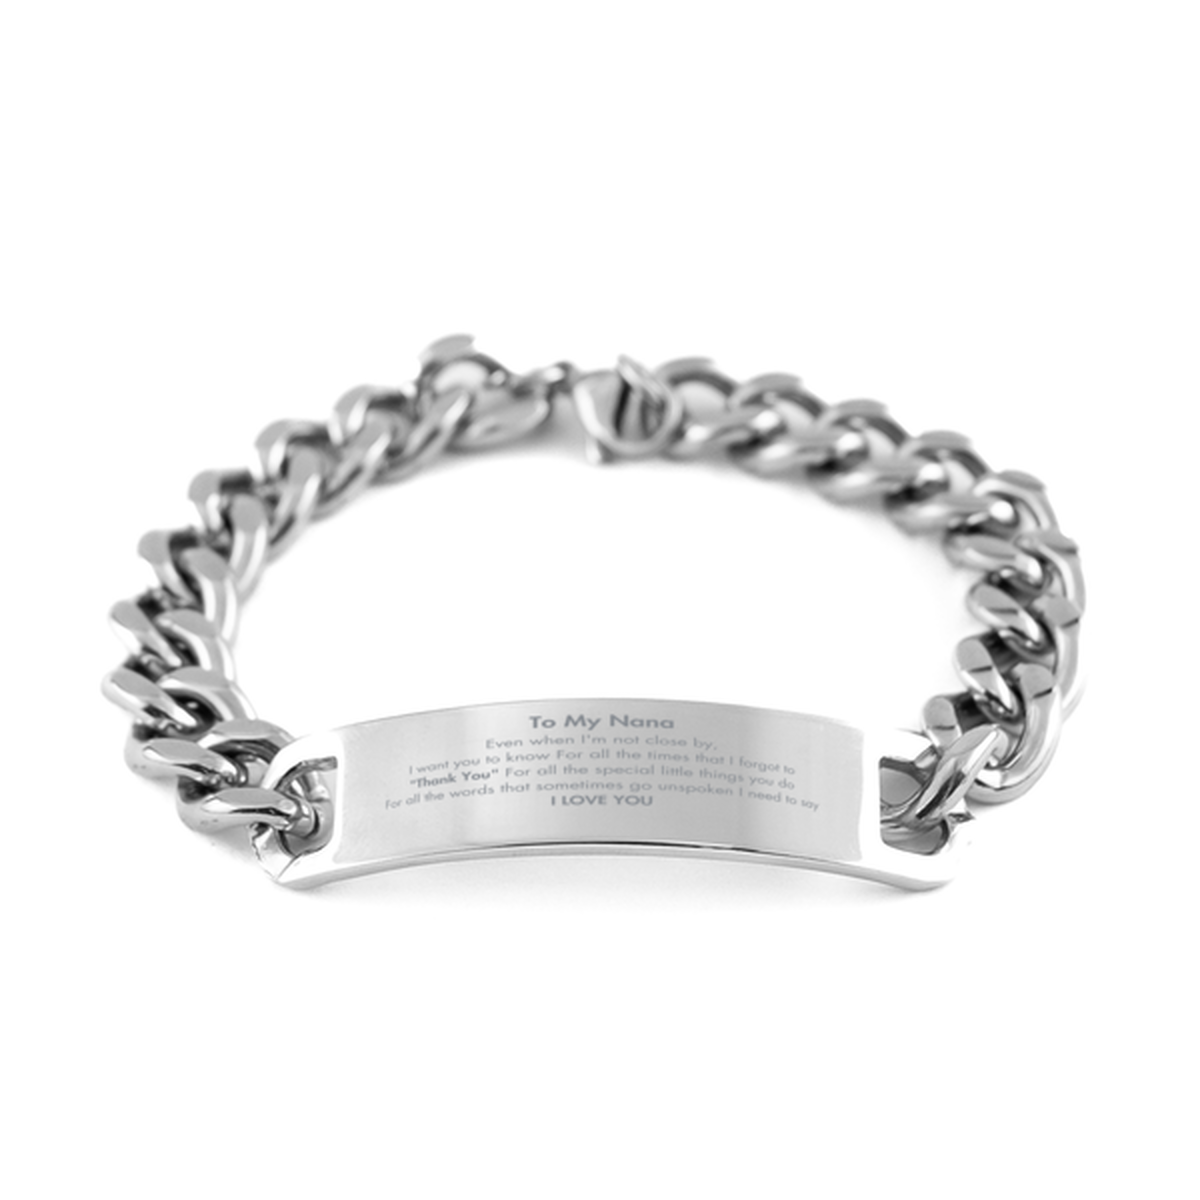 Thank You Gifts for Nana, Keepsake Cuban Chain Stainless Steel Bracelet Gifts for Nana Birthday Mother's day Father's Day Nana For all the words That sometimes go unspoken I need to say I LOVE YOU